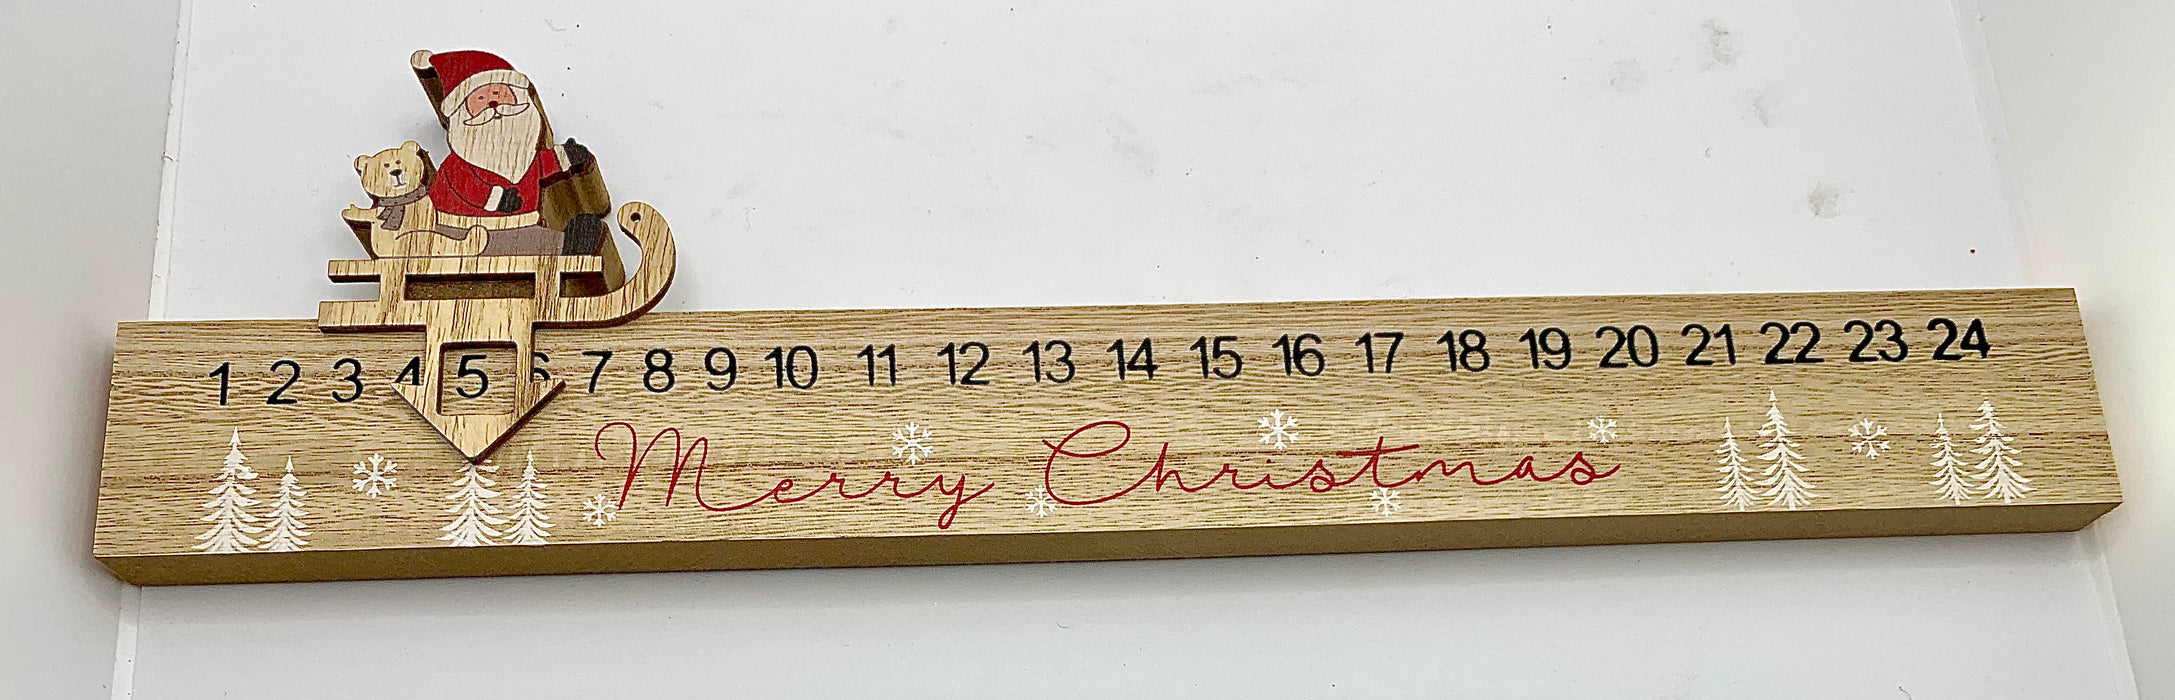 Advent Countdown - Wooden Santa Claus on Sled